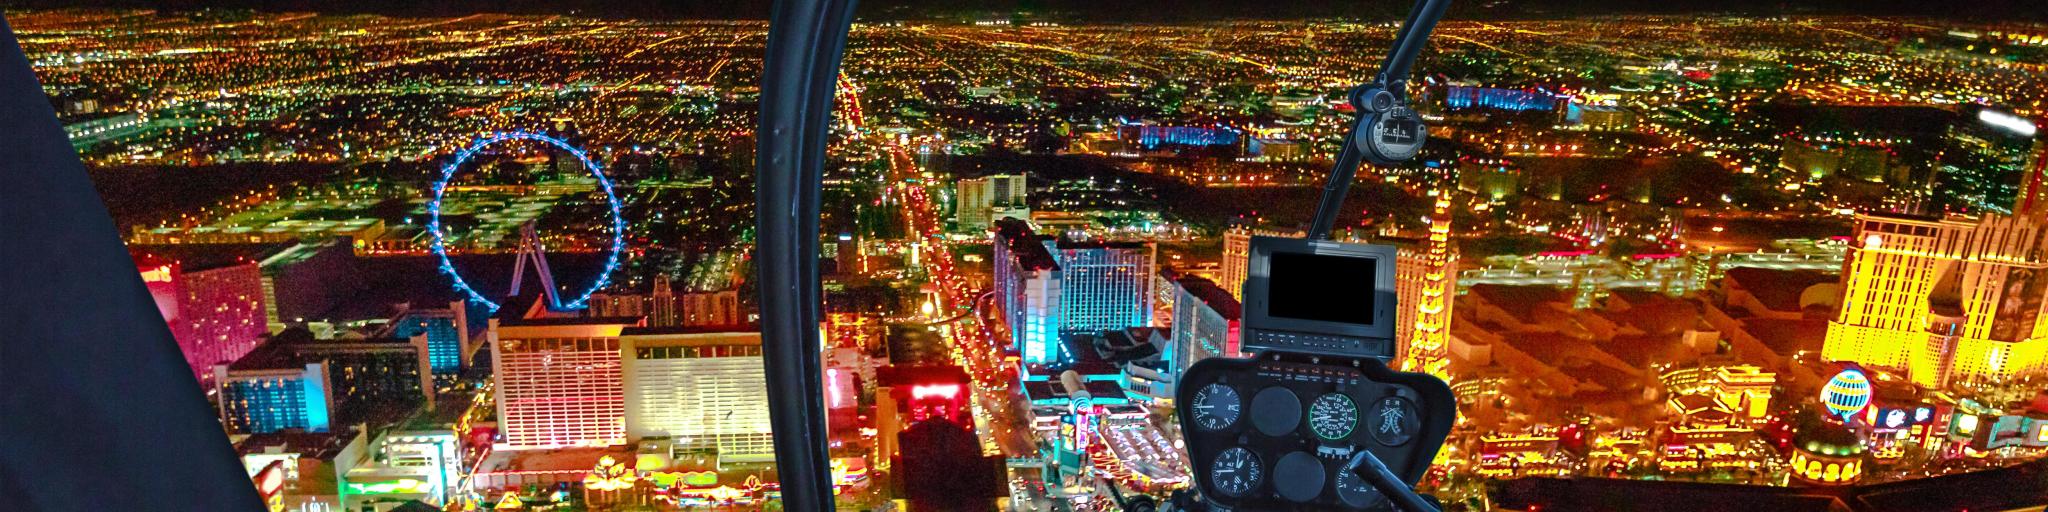 Helicopter interior on Las Vegas buildings and skyscrapers of downtown with illuminated casino hotels at night 